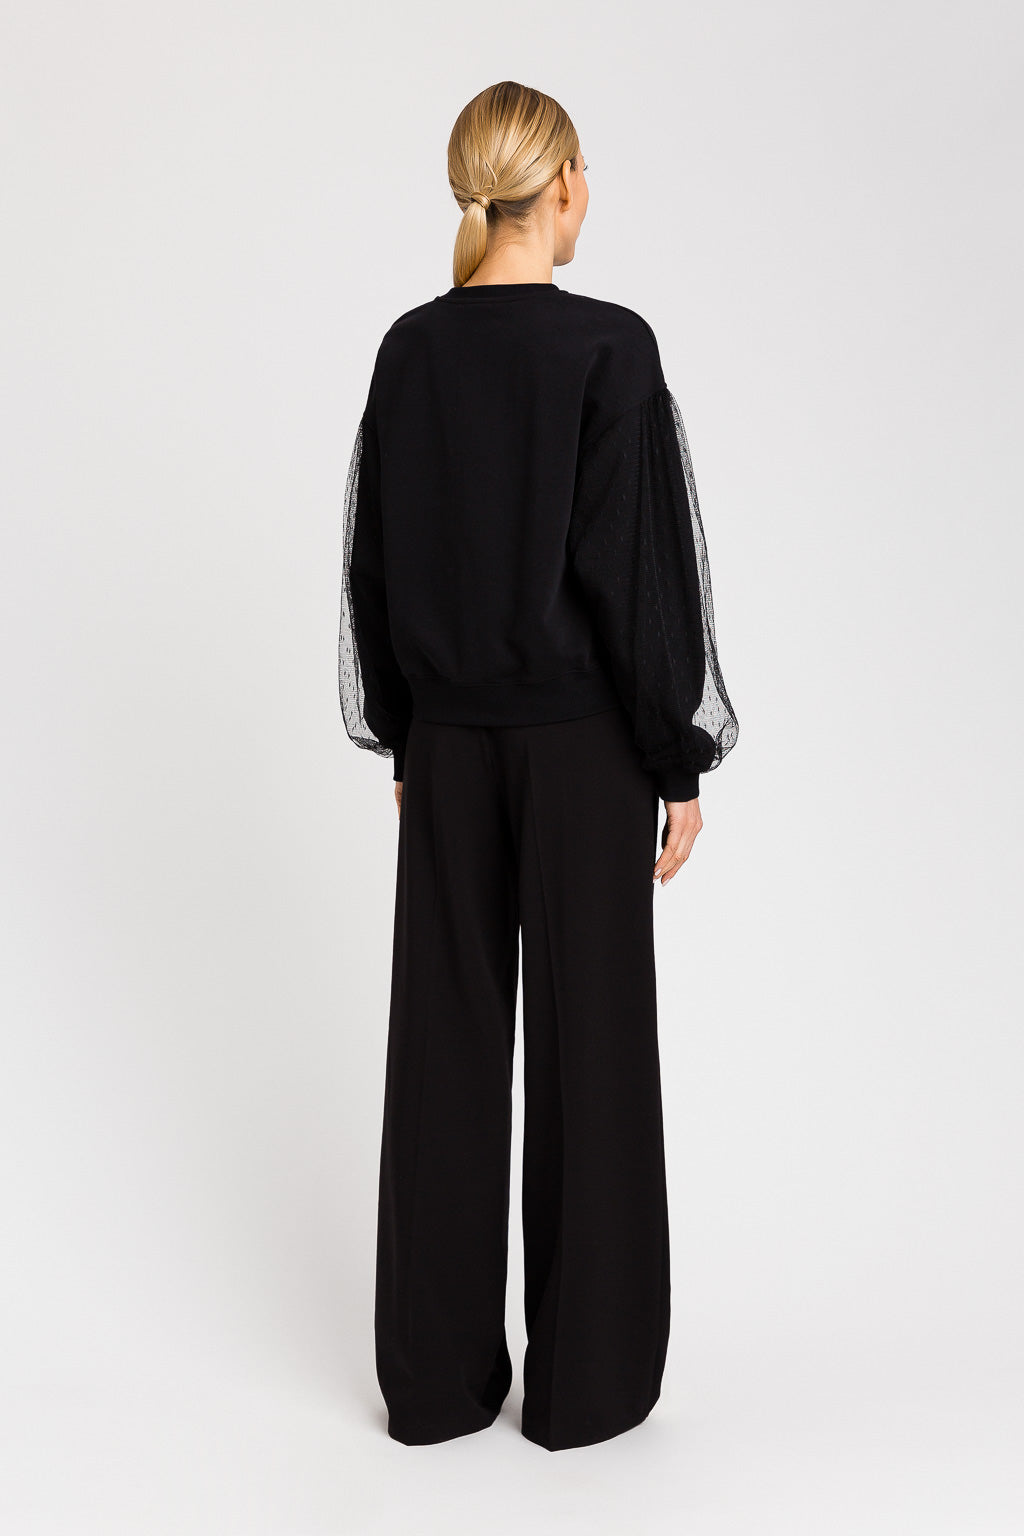 Twinset Soft Black Trousers